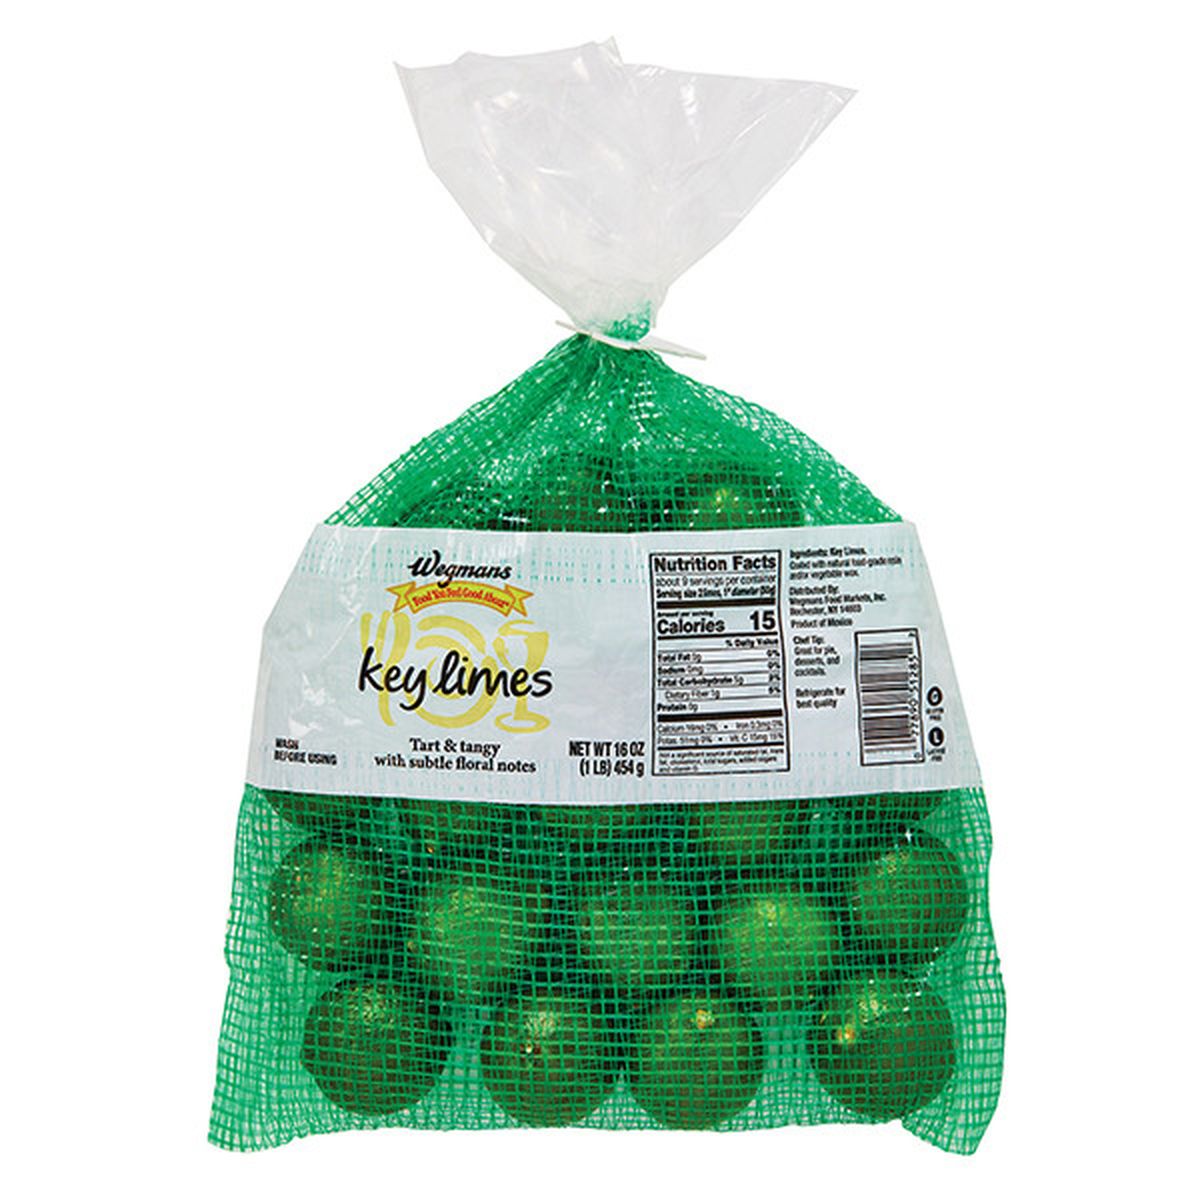 Calories in Key Limes, Bagged